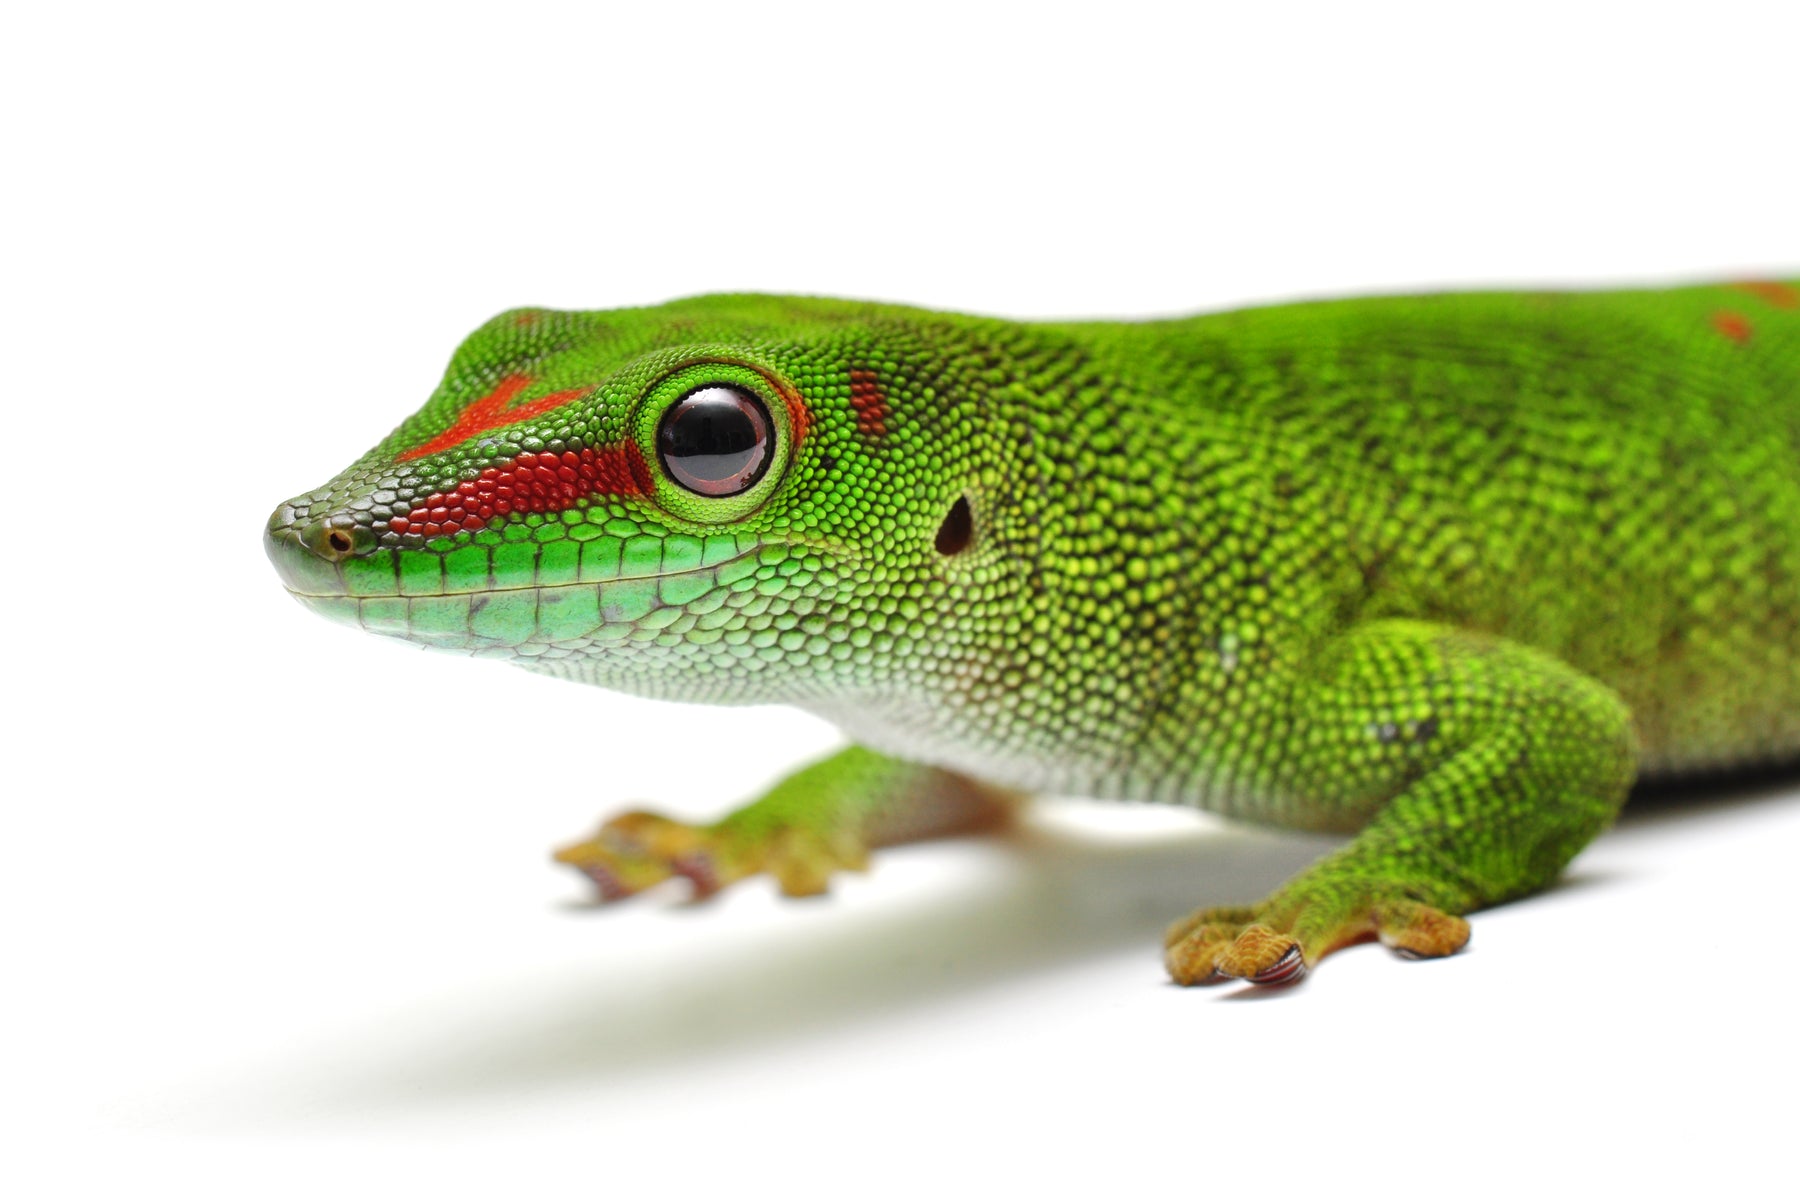 How to Care for Your Giant Day Gecko